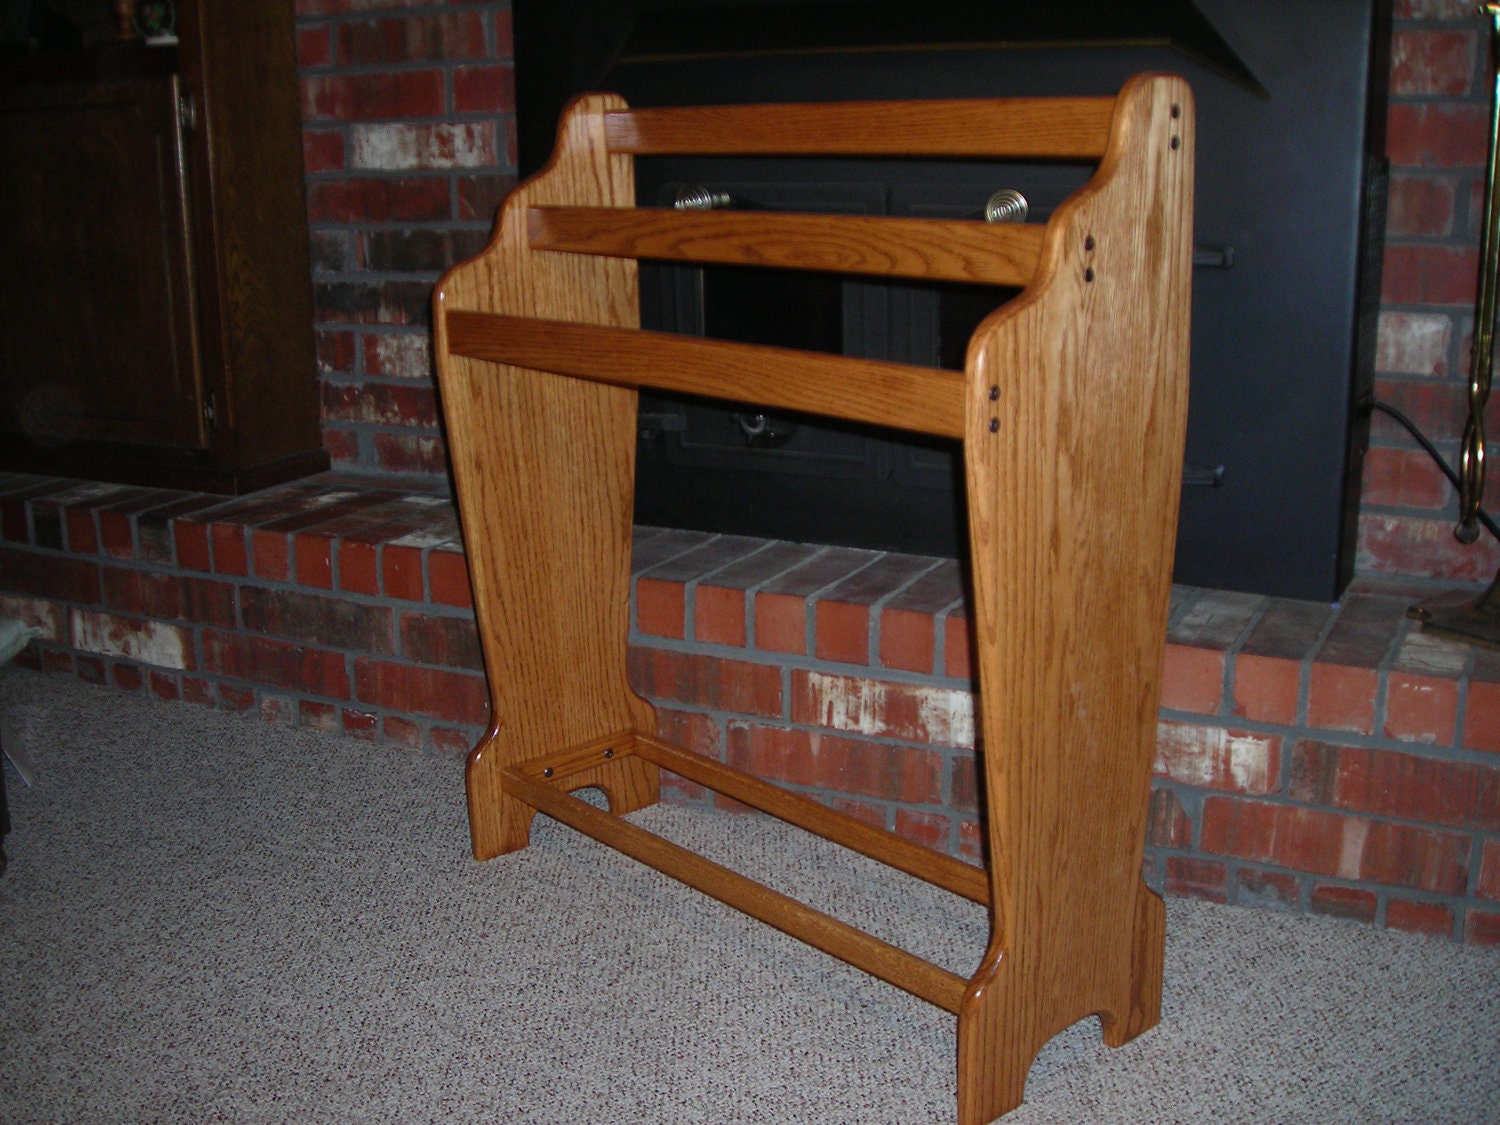 Cascade Quilt Rack by DCMProducts on Etsy